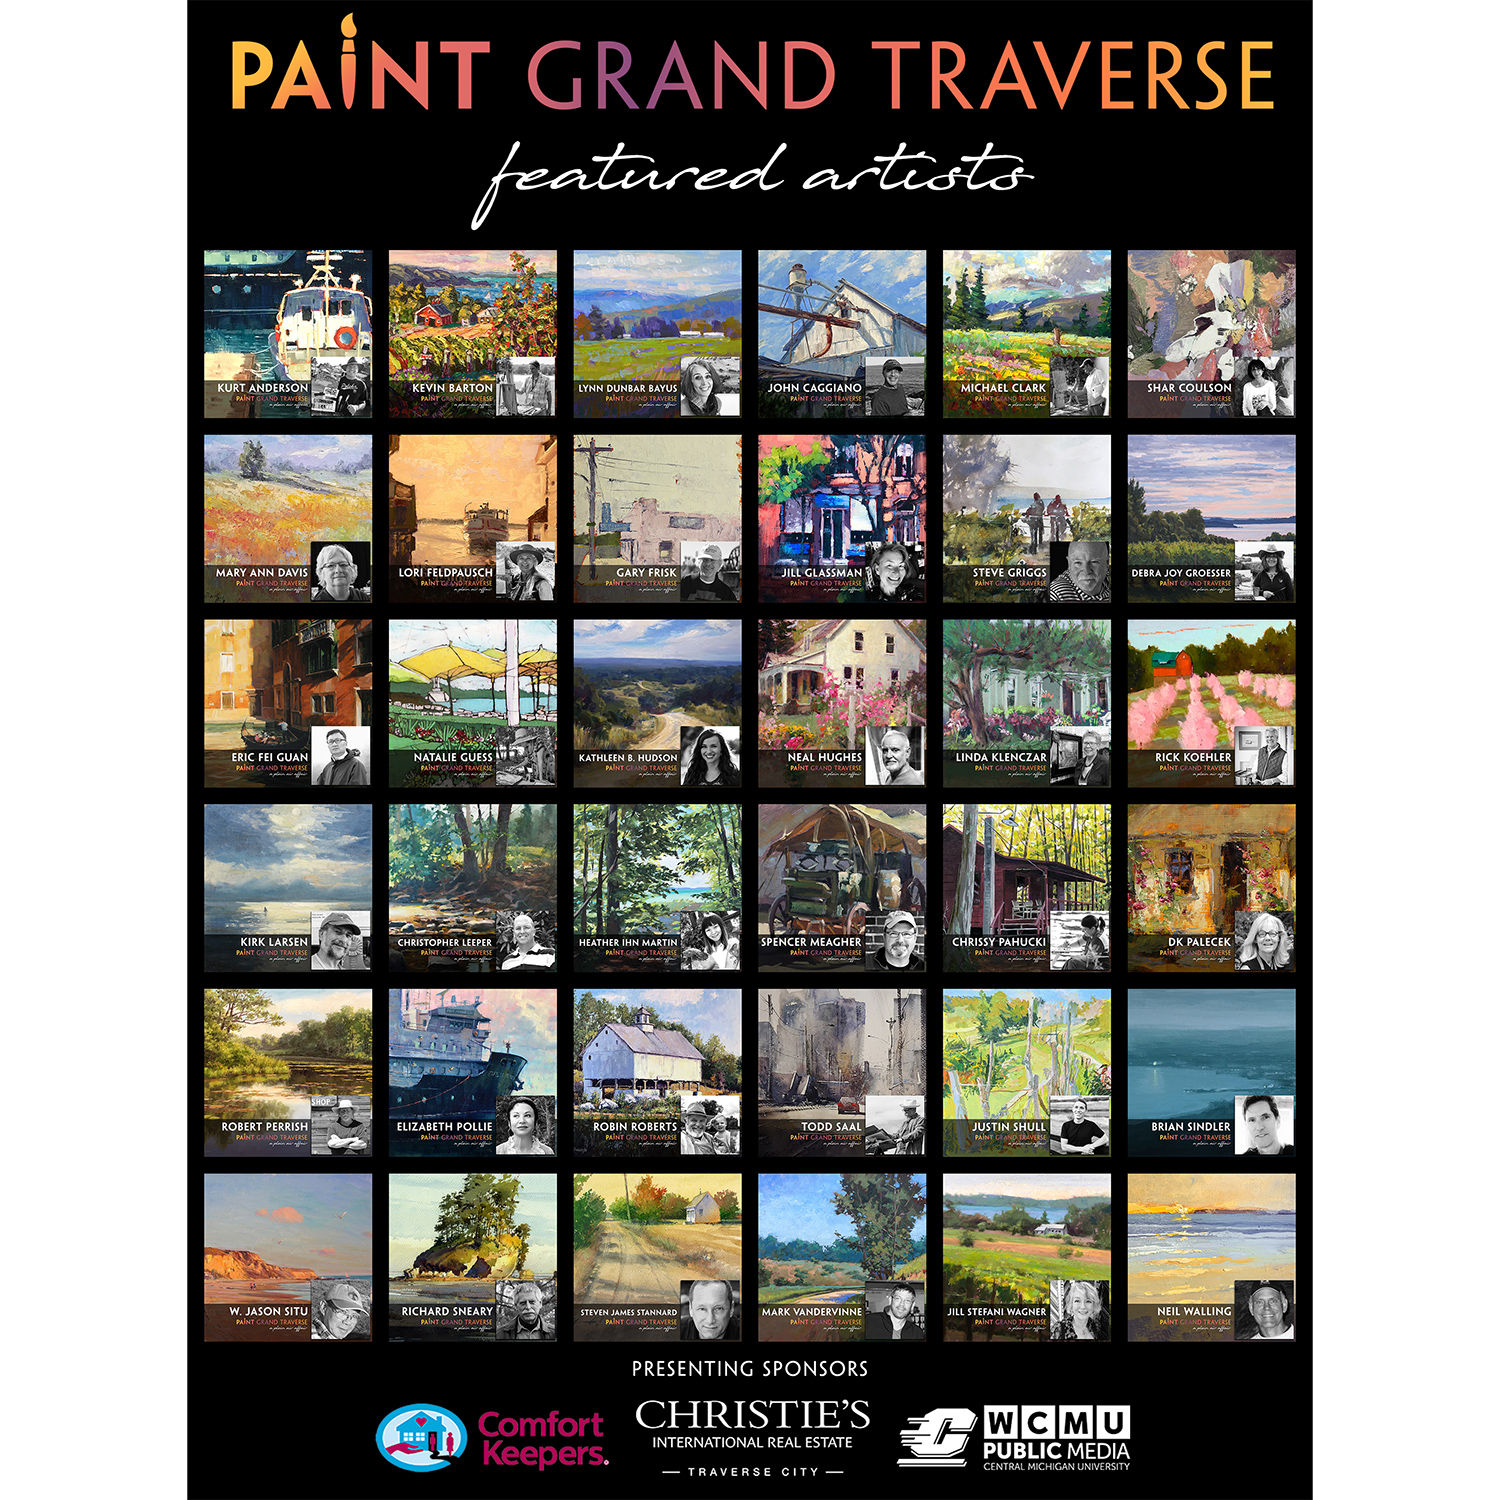 Paint Grand Traverse 2020 featured artists